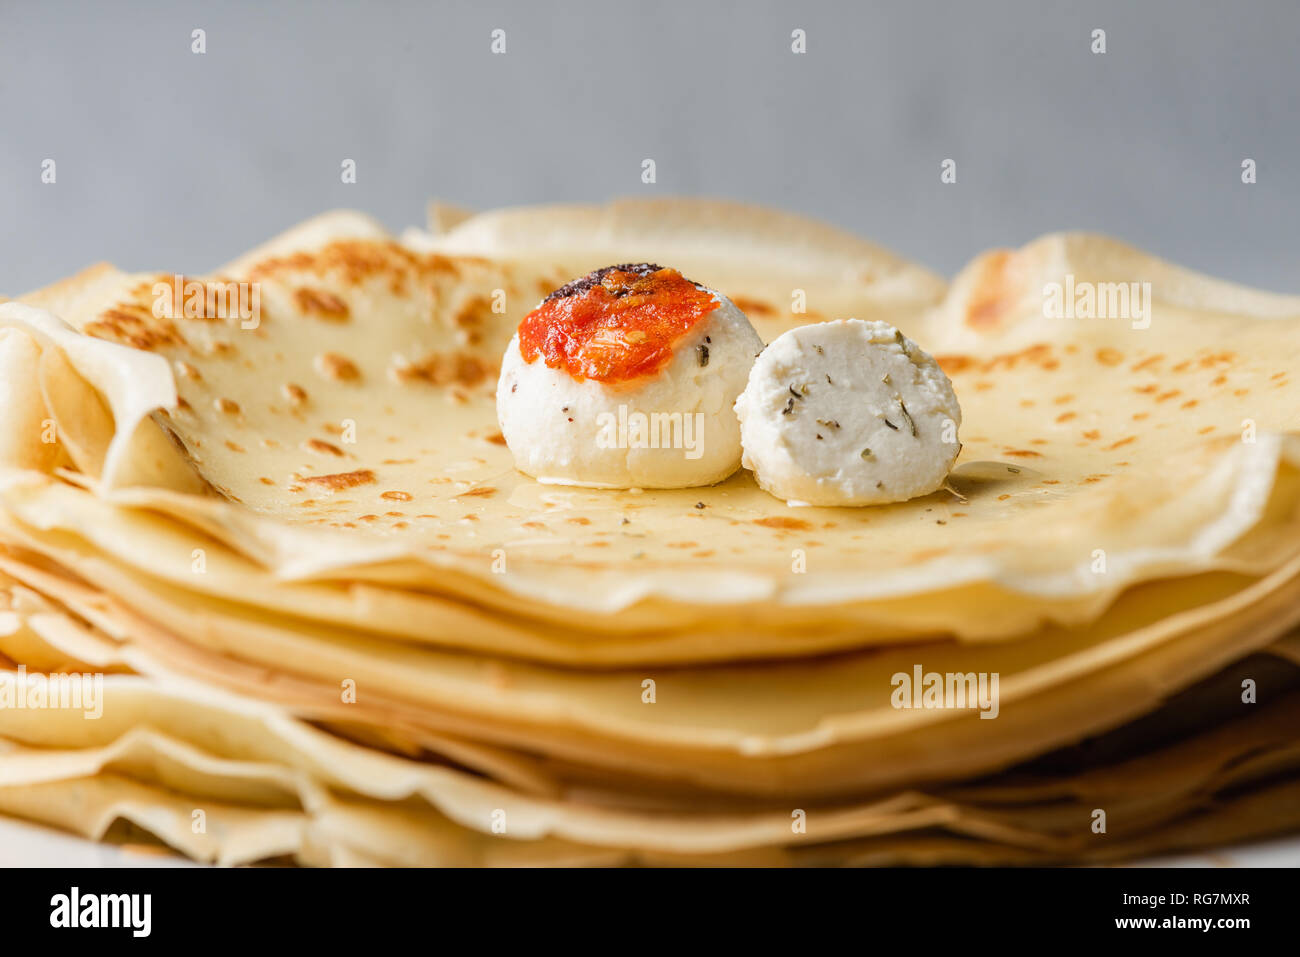 Russian style thin pancakes with homemade cheese balls Stock Photo